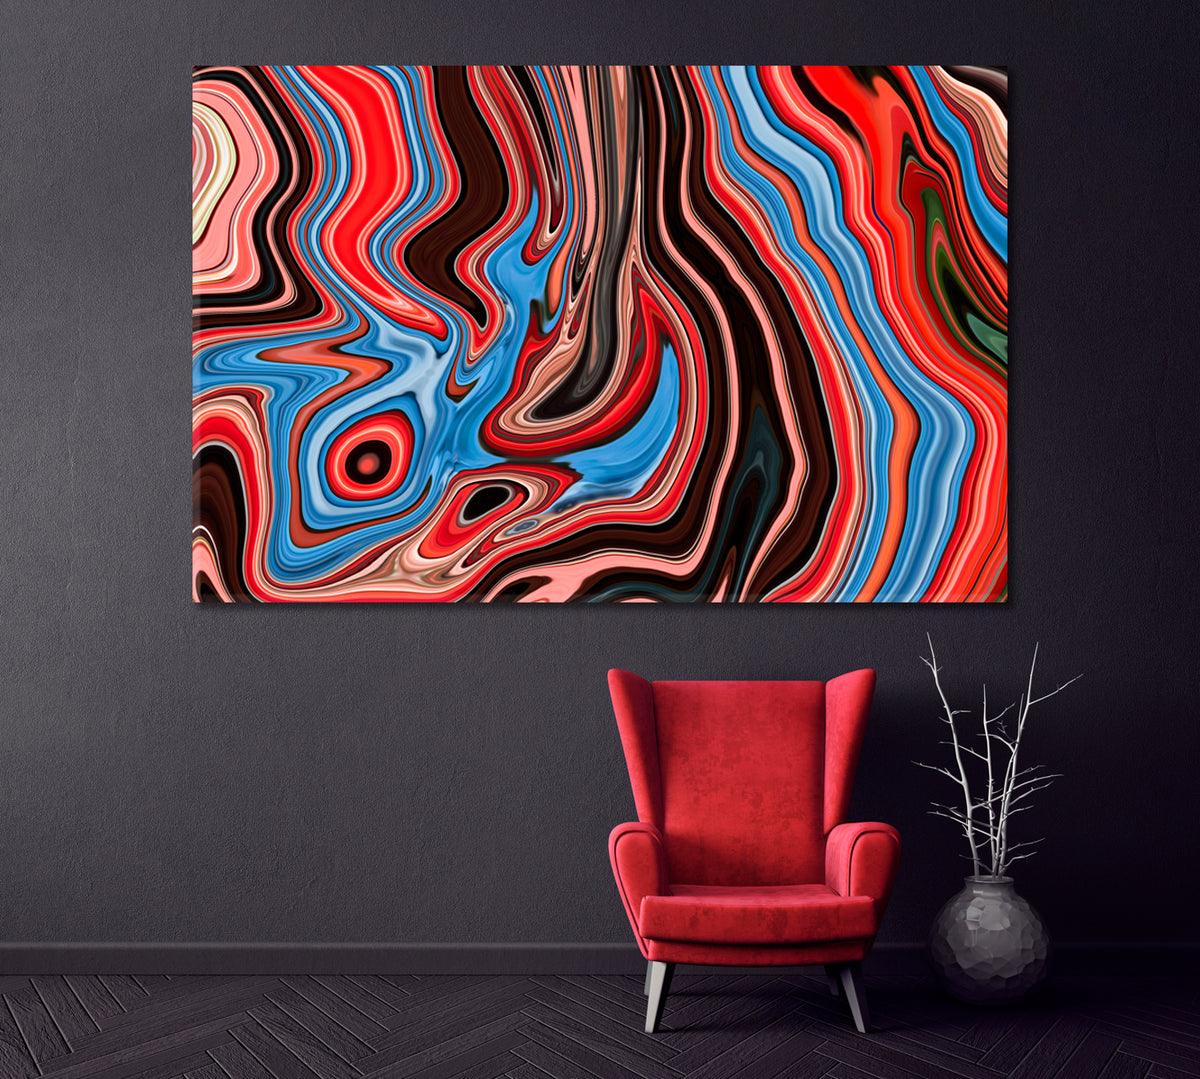 Colorful Marble Waves Canvas Print ArtLexy 1 Panel 24"x16" inches 